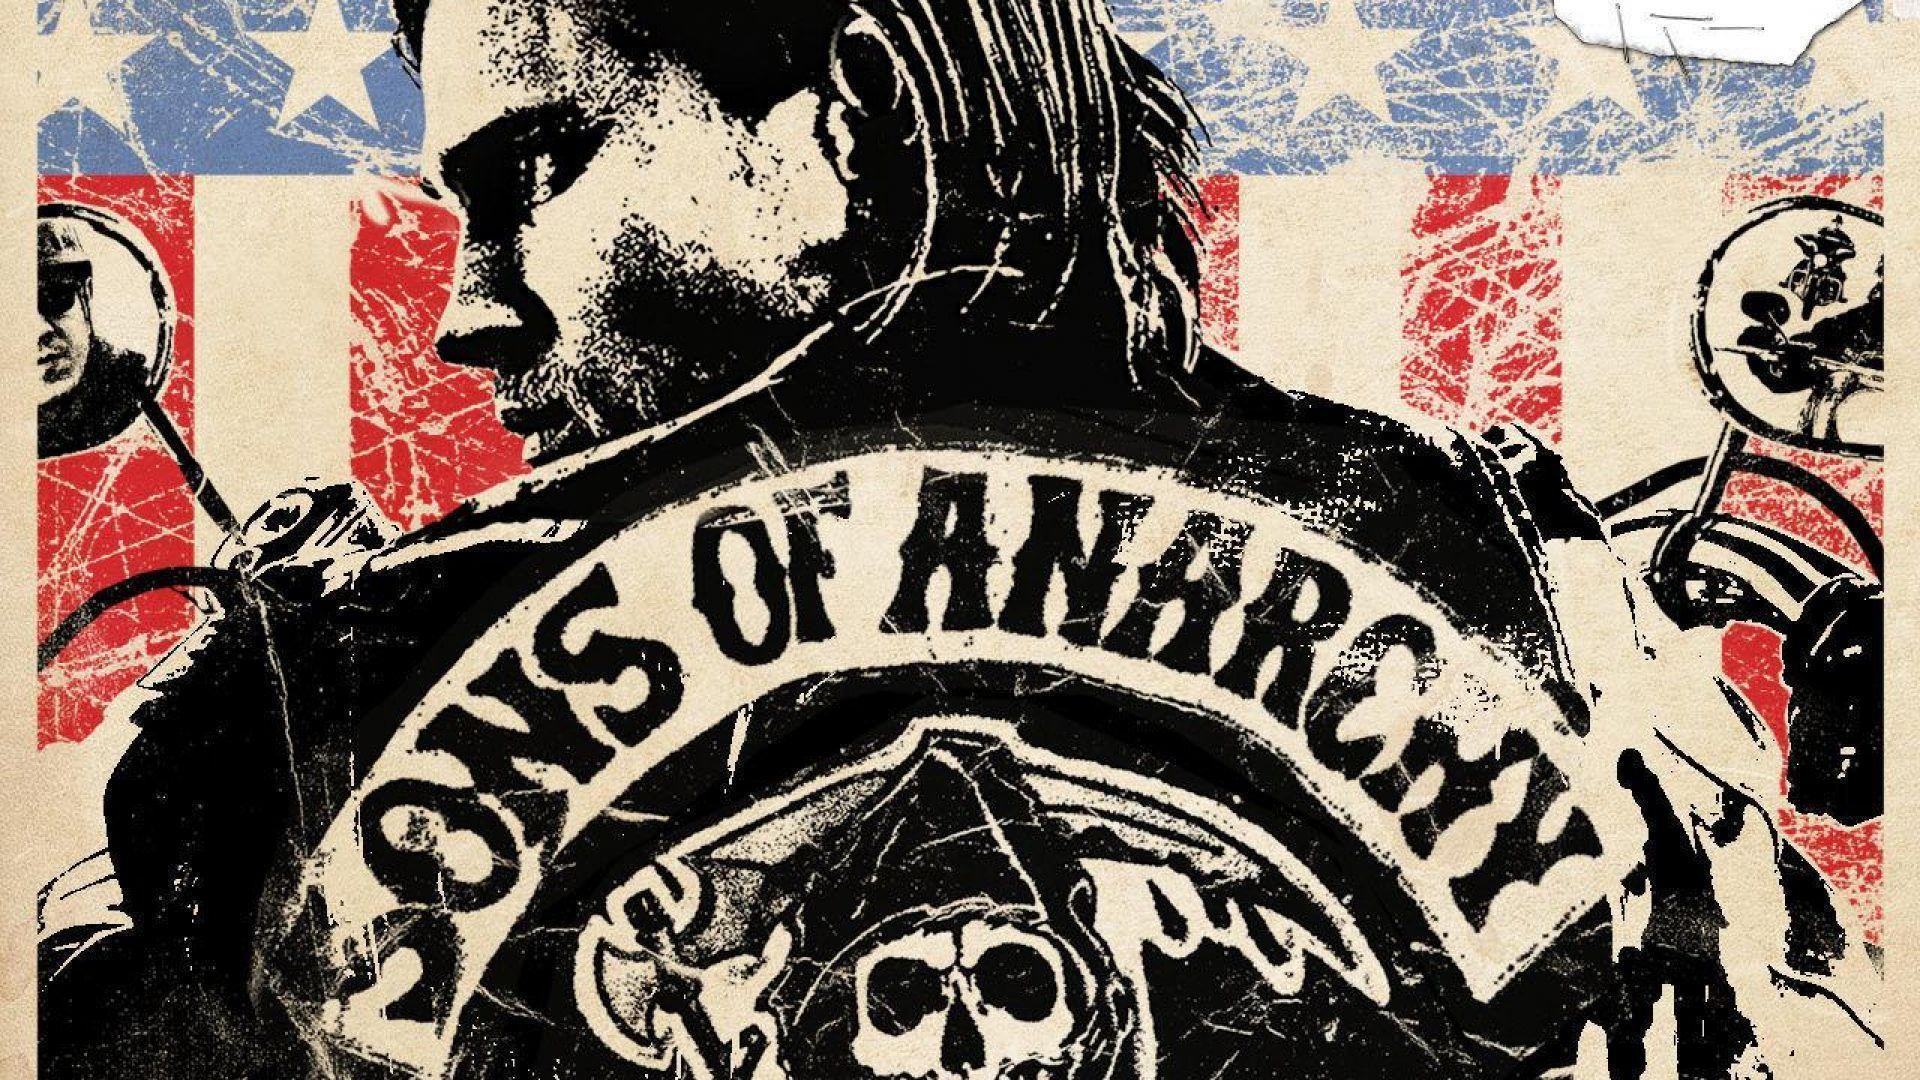 1920 x 1080 · jpeg - Sons Of Anarchy Wallpapers - Wallpaper Cave